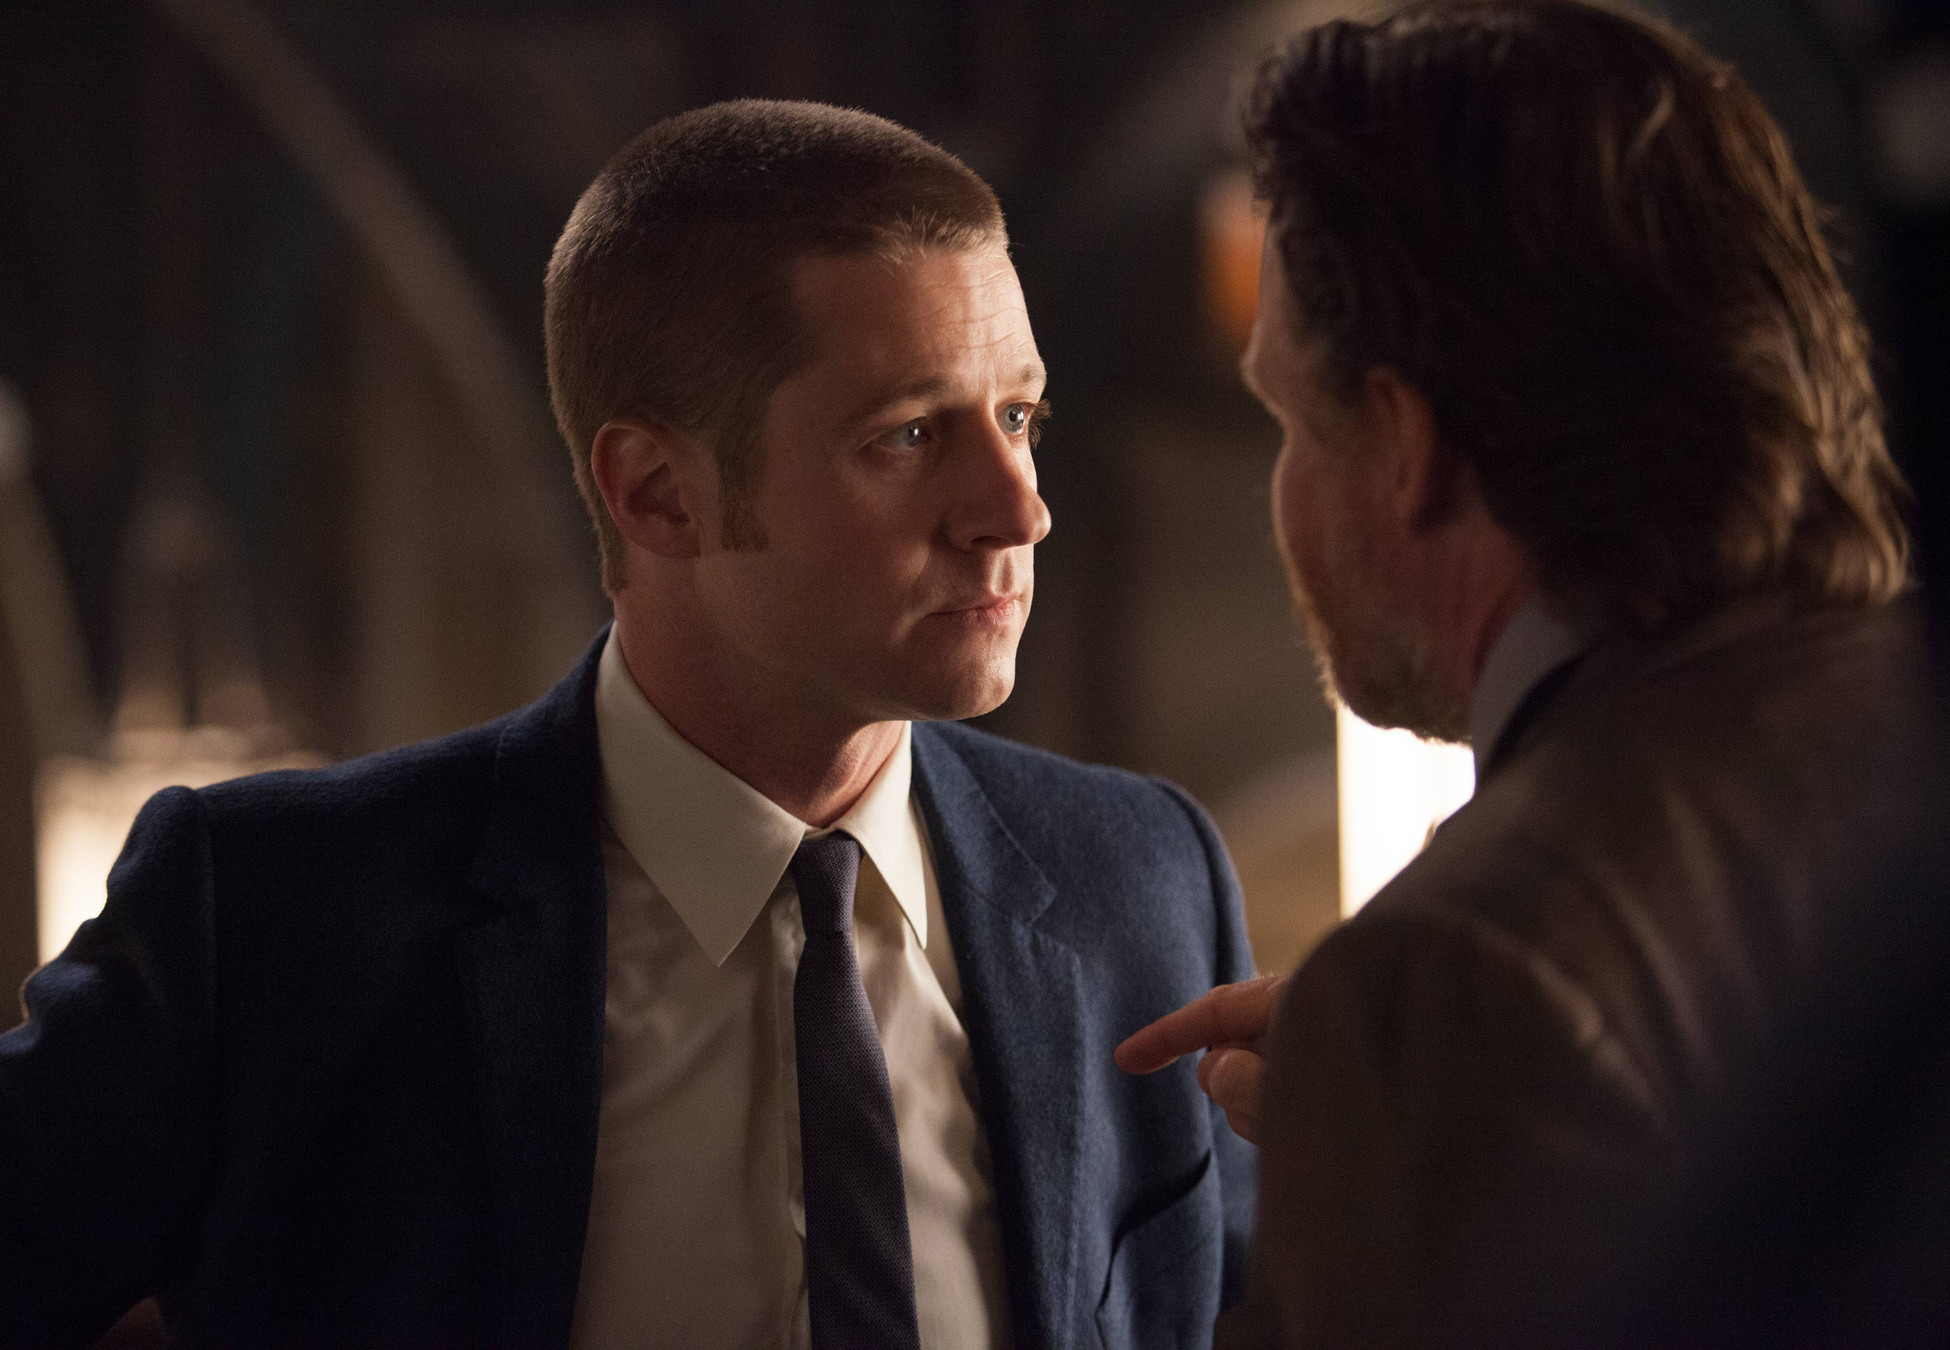 GOTHAM: Detectives Gordon (Ben McKenzie, L) and Bullock (Donal Logue, R) argue about ethics in the "The Balloonman" episode of GOTHAM airing Monday, Oct. 6 (8:00-9:00 PM ET/PT) on FOX. Â©2014 Fox Broadcasting Co. Cr: Jessica Miglio/FOX